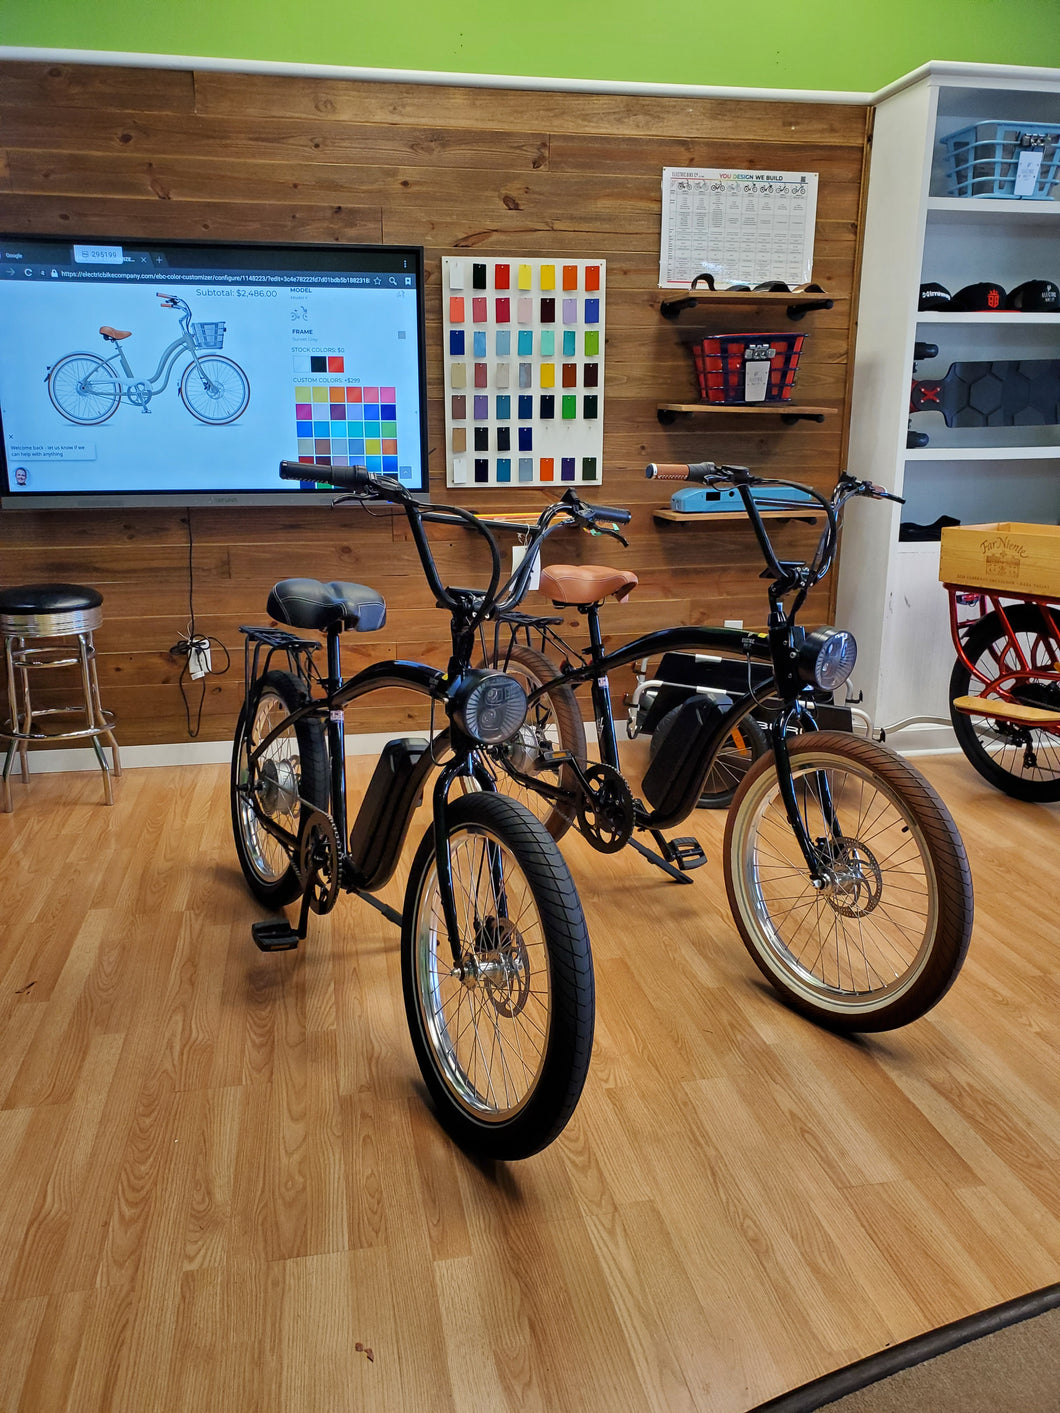 Electricbikeco model A